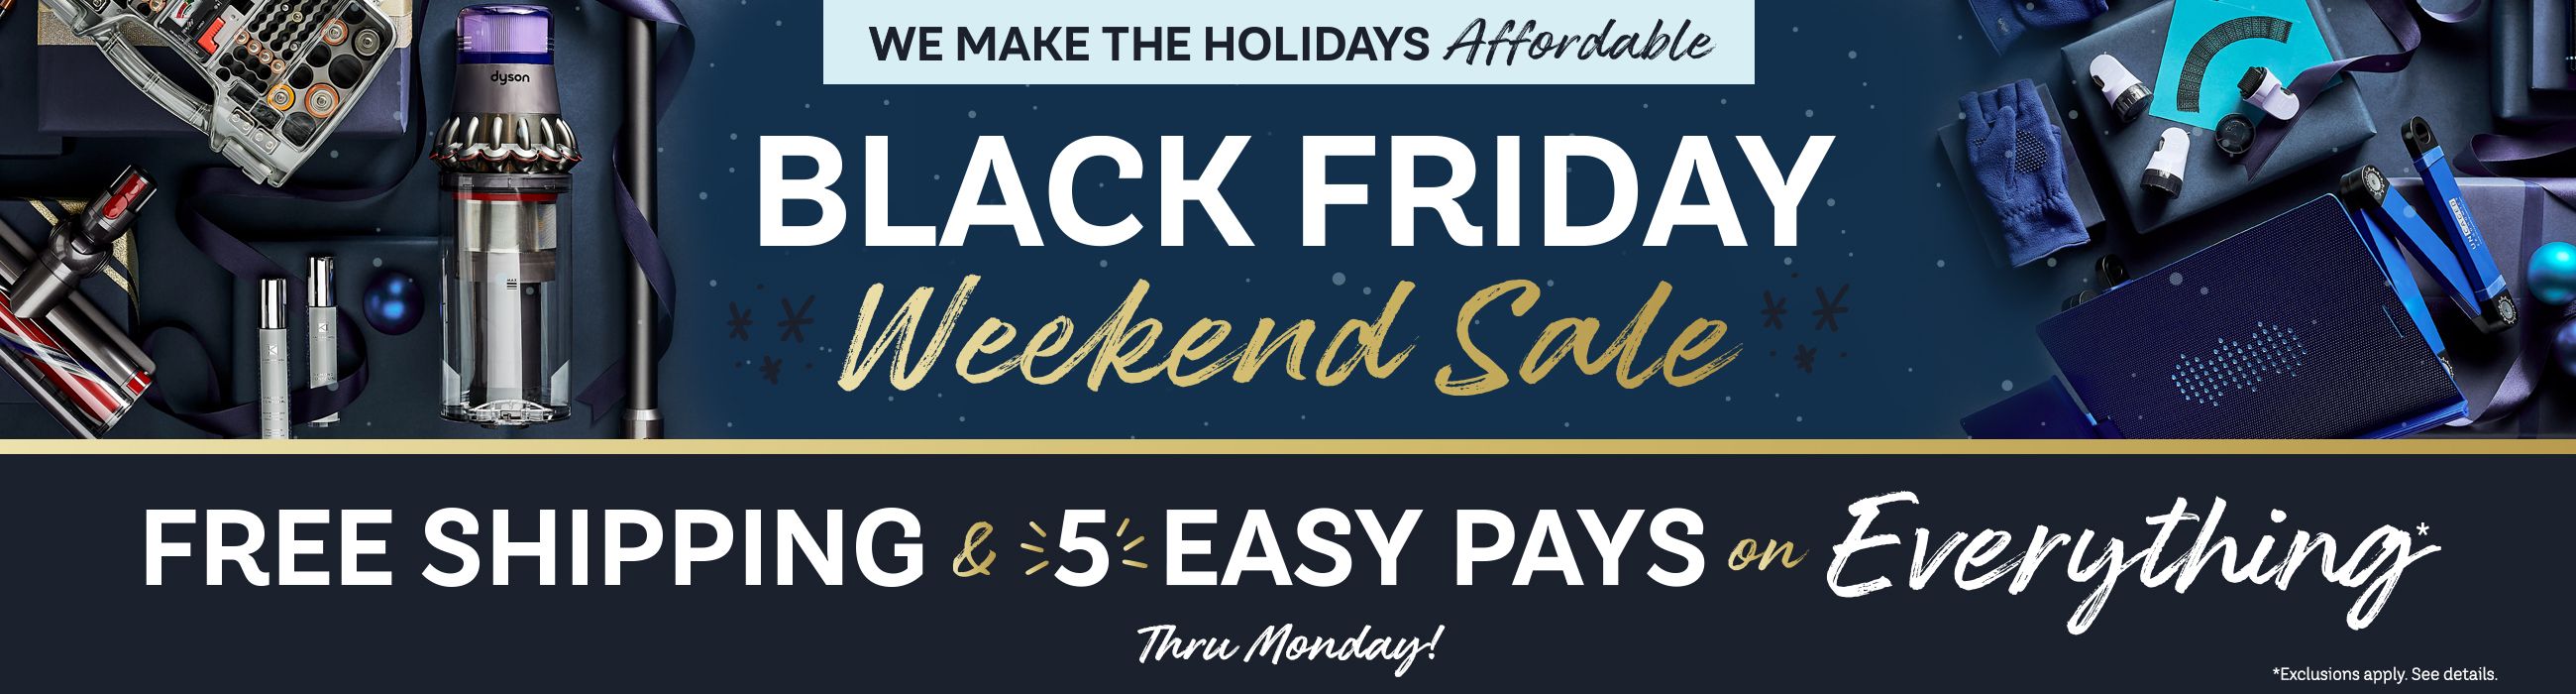 We Make the Holidays Affordable - It’s Our Black Friday Weekend Sale - Thru Monday!  Free Shipping & 5 Easy Pays on Everything*   *Exclusions apply. See details. 